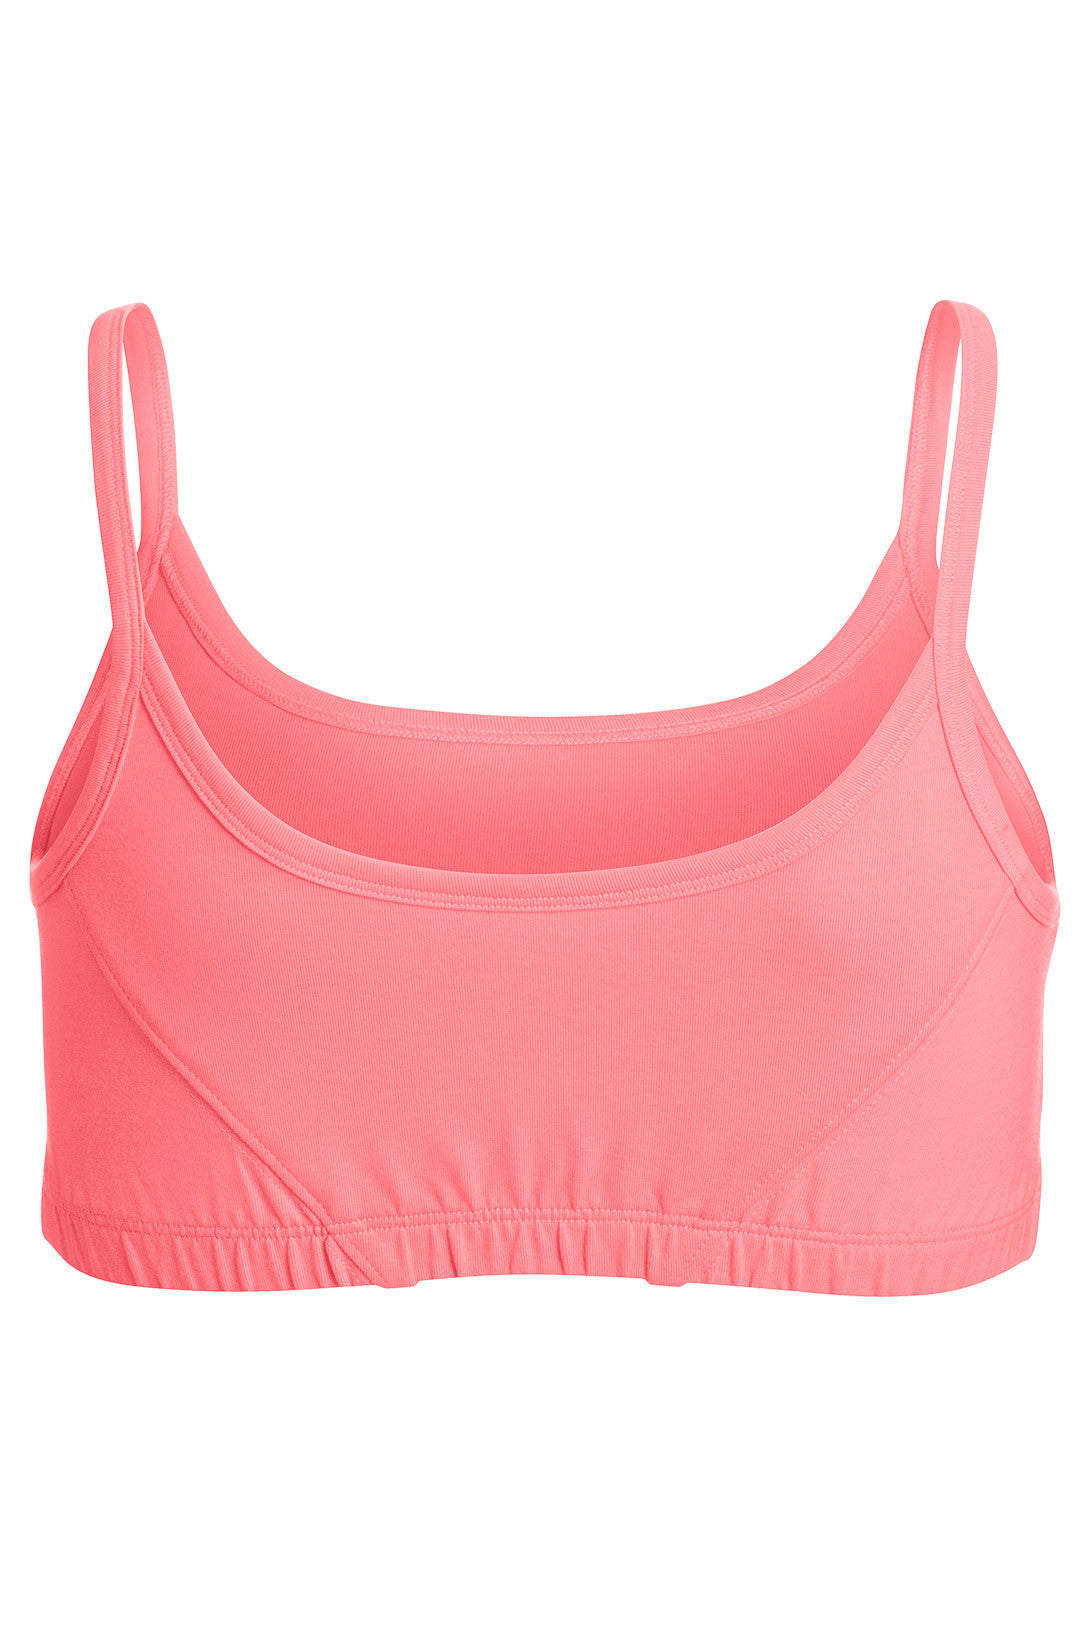 Buy SheBAE® Stylish Modern Look Non-Padded Wirefree Cotton Sports Bra for  Women/Girls, Heavy Breast Full Coverage Workout Bra, Gym Top for Gym Yoga  (Pink) (32B) at